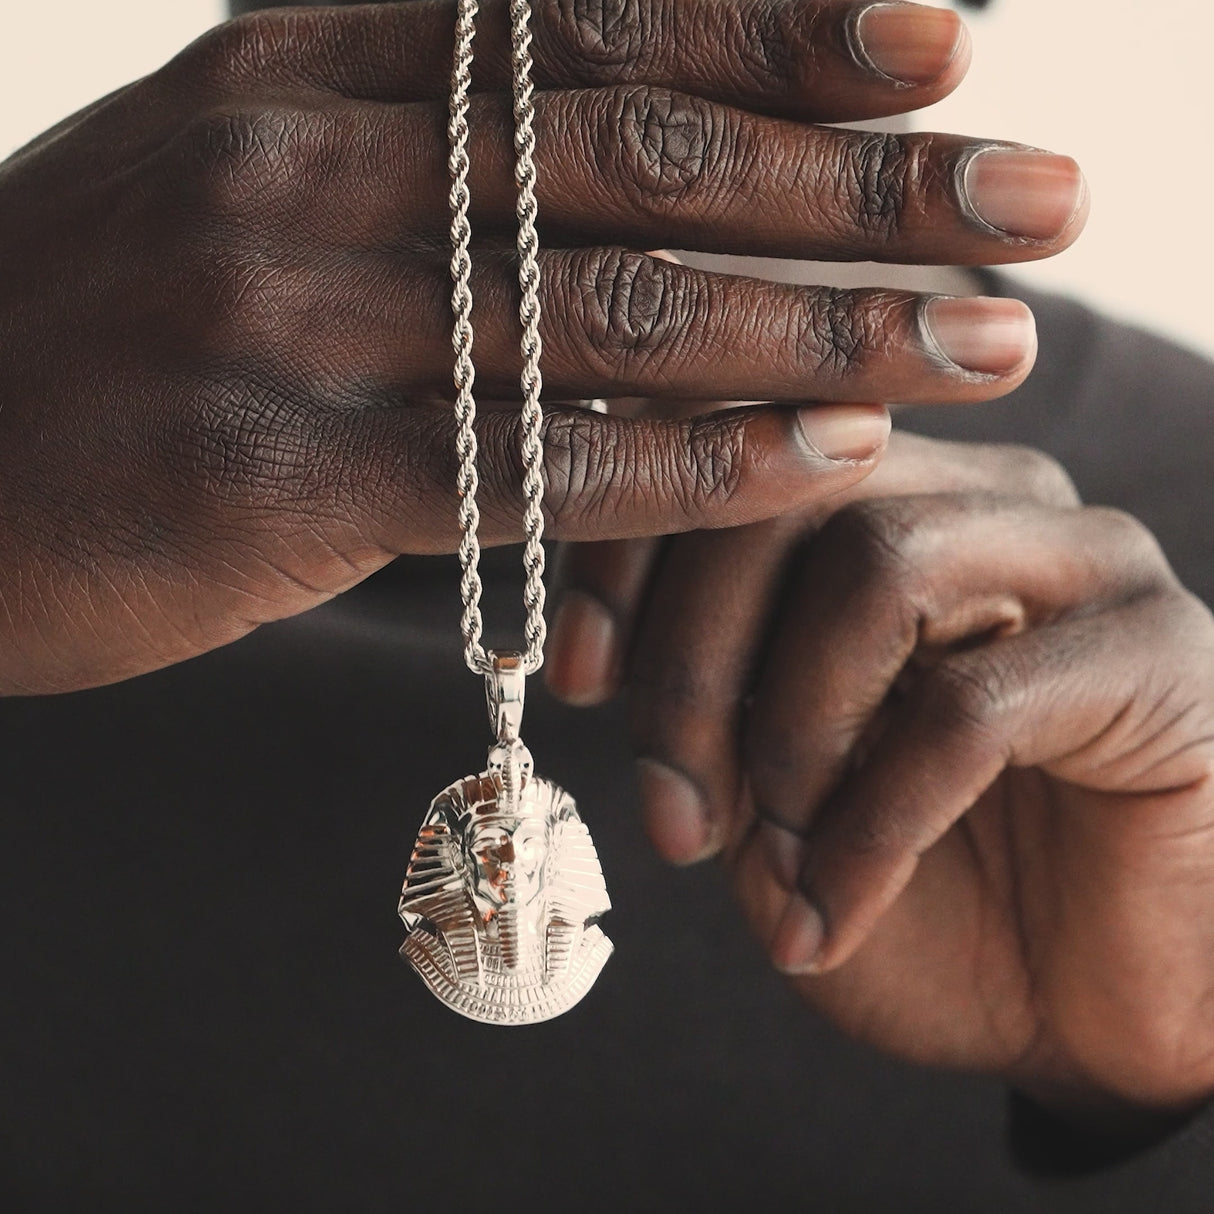 Pharaoh Head V2 Necklace Pendant & Rope Chain White Gold The Gold Gods Video